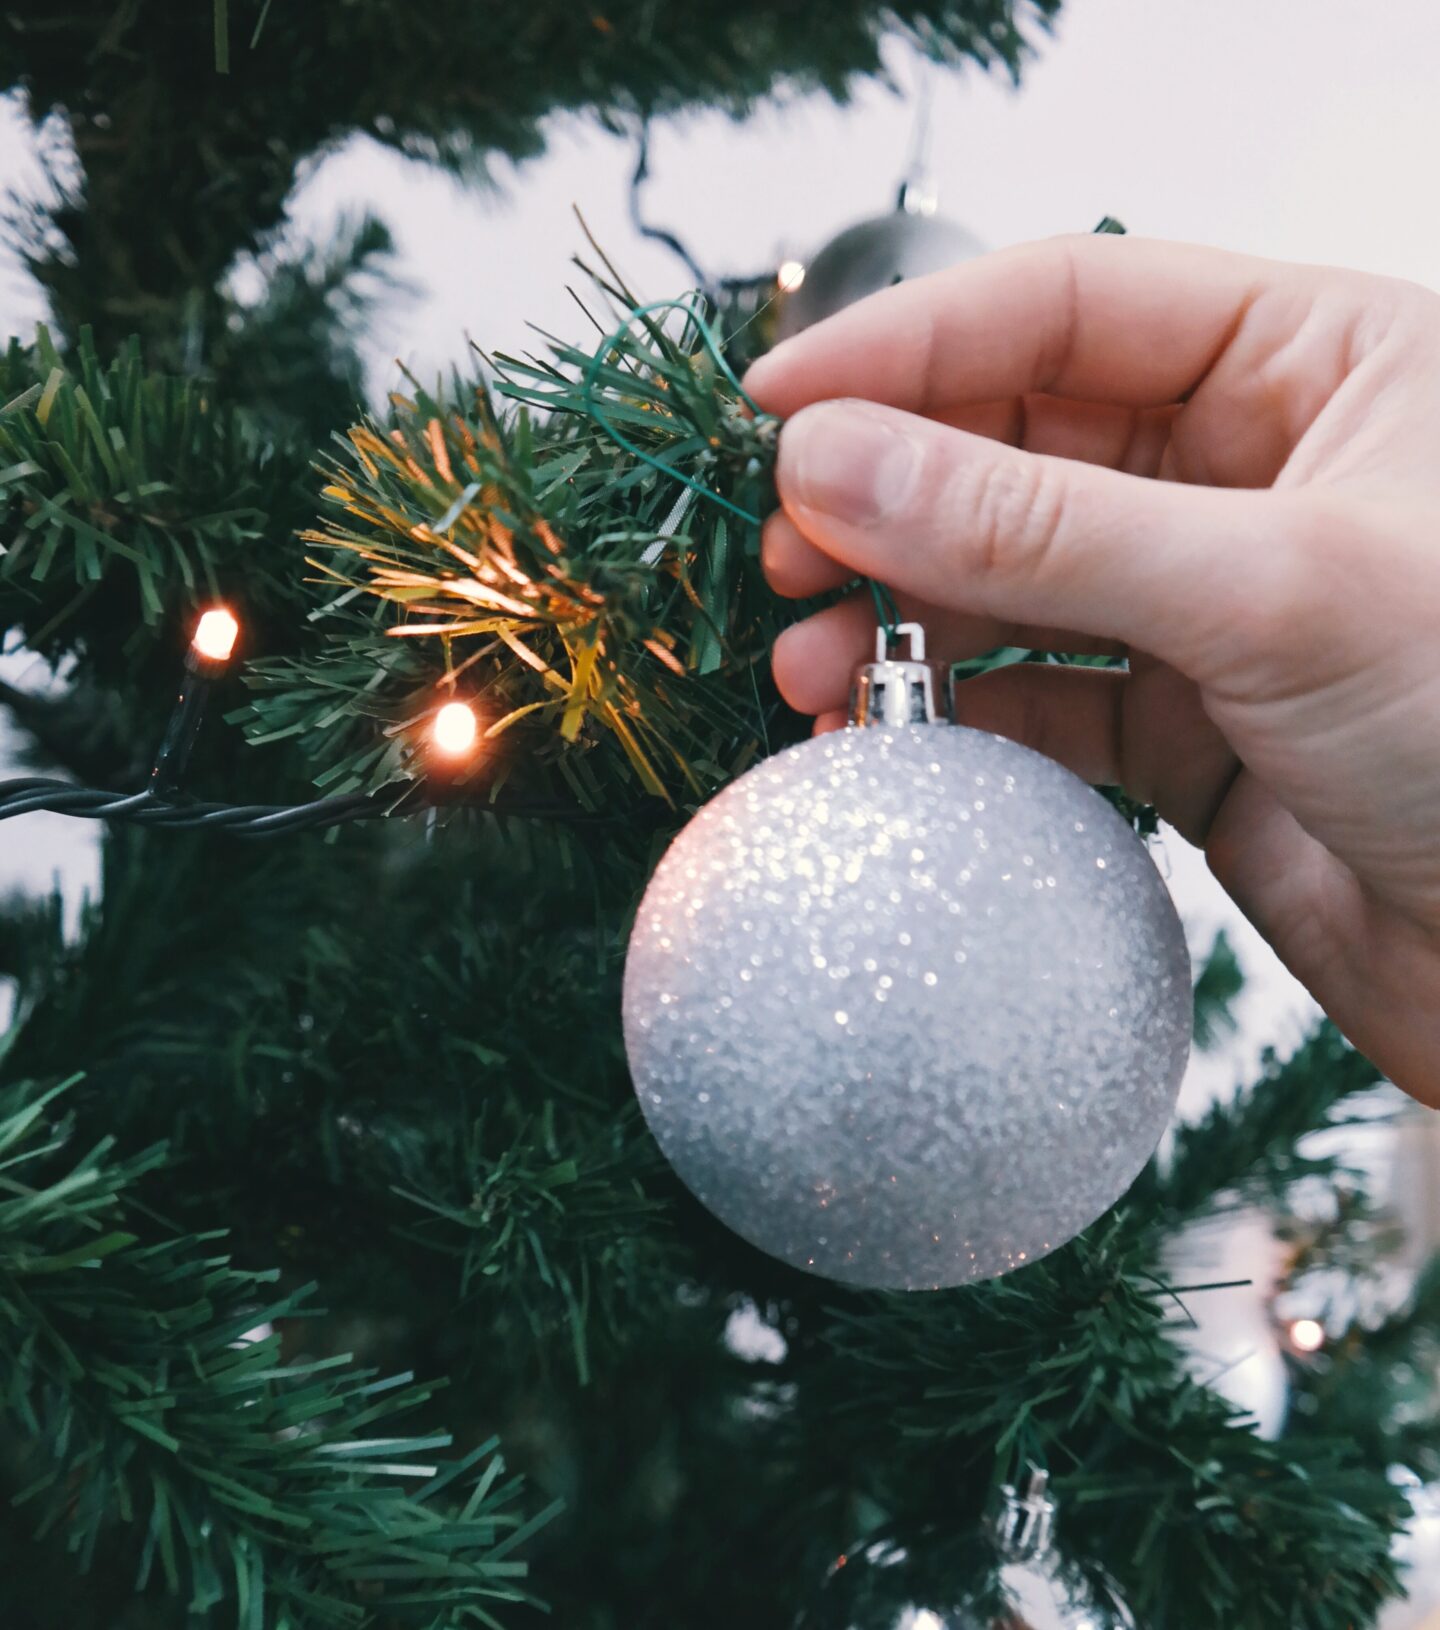 Partial picture of a green Christmas tree with a hand hanging up a silver bauble